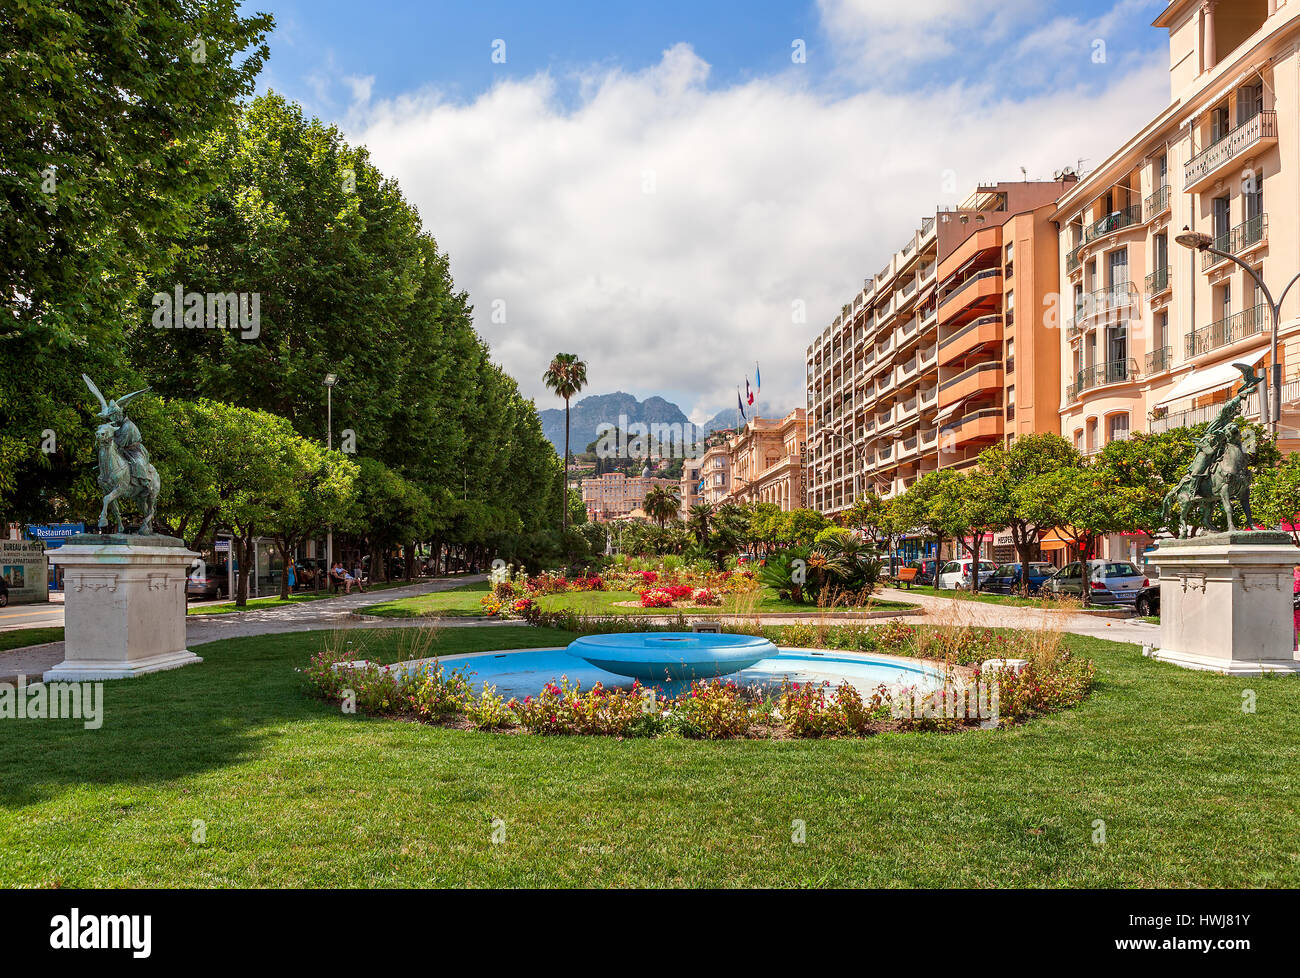 MENTON, FRANCE - JULY 07, 2012: View of green urban park along street and colorful buildings in center of Menton - small town on French Riviera, famou Stock Photo